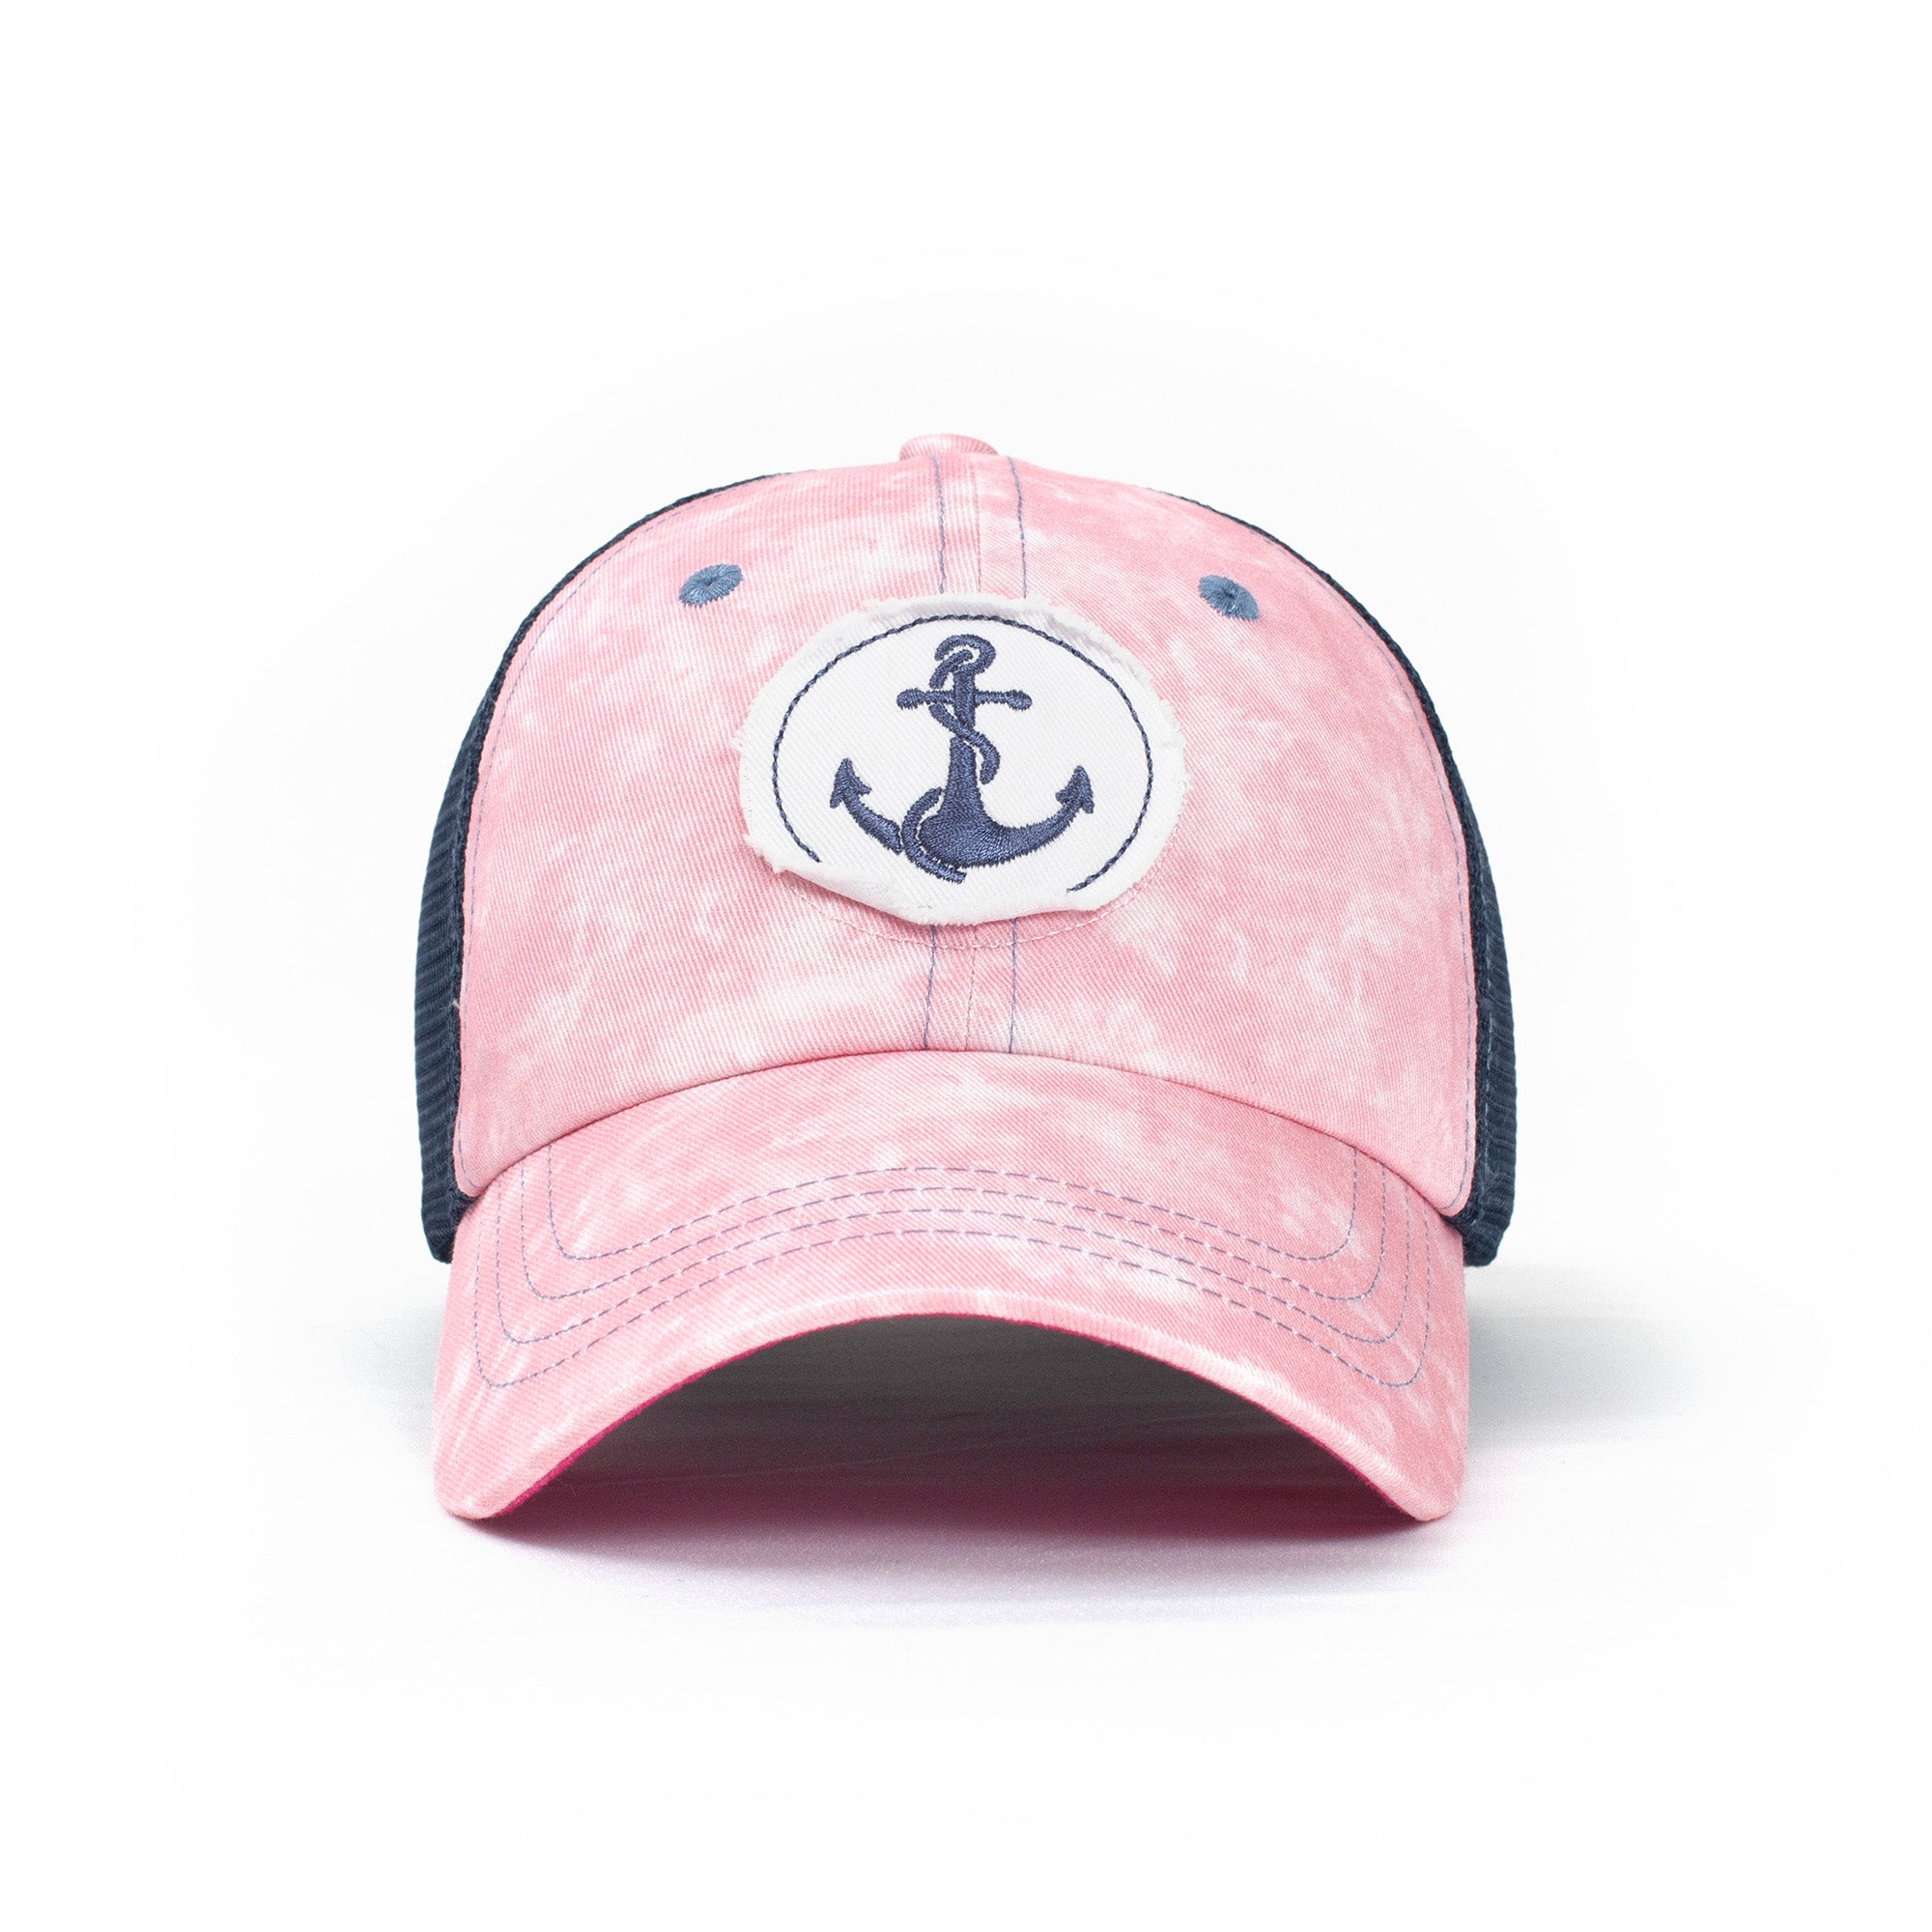 Women’s Hats, Women’s Trucker Hats, Trucker Hats, Hats, Adjustable Hats, Everyday Use, Comfortable, Nautical, Anchor, Matey, Pattern